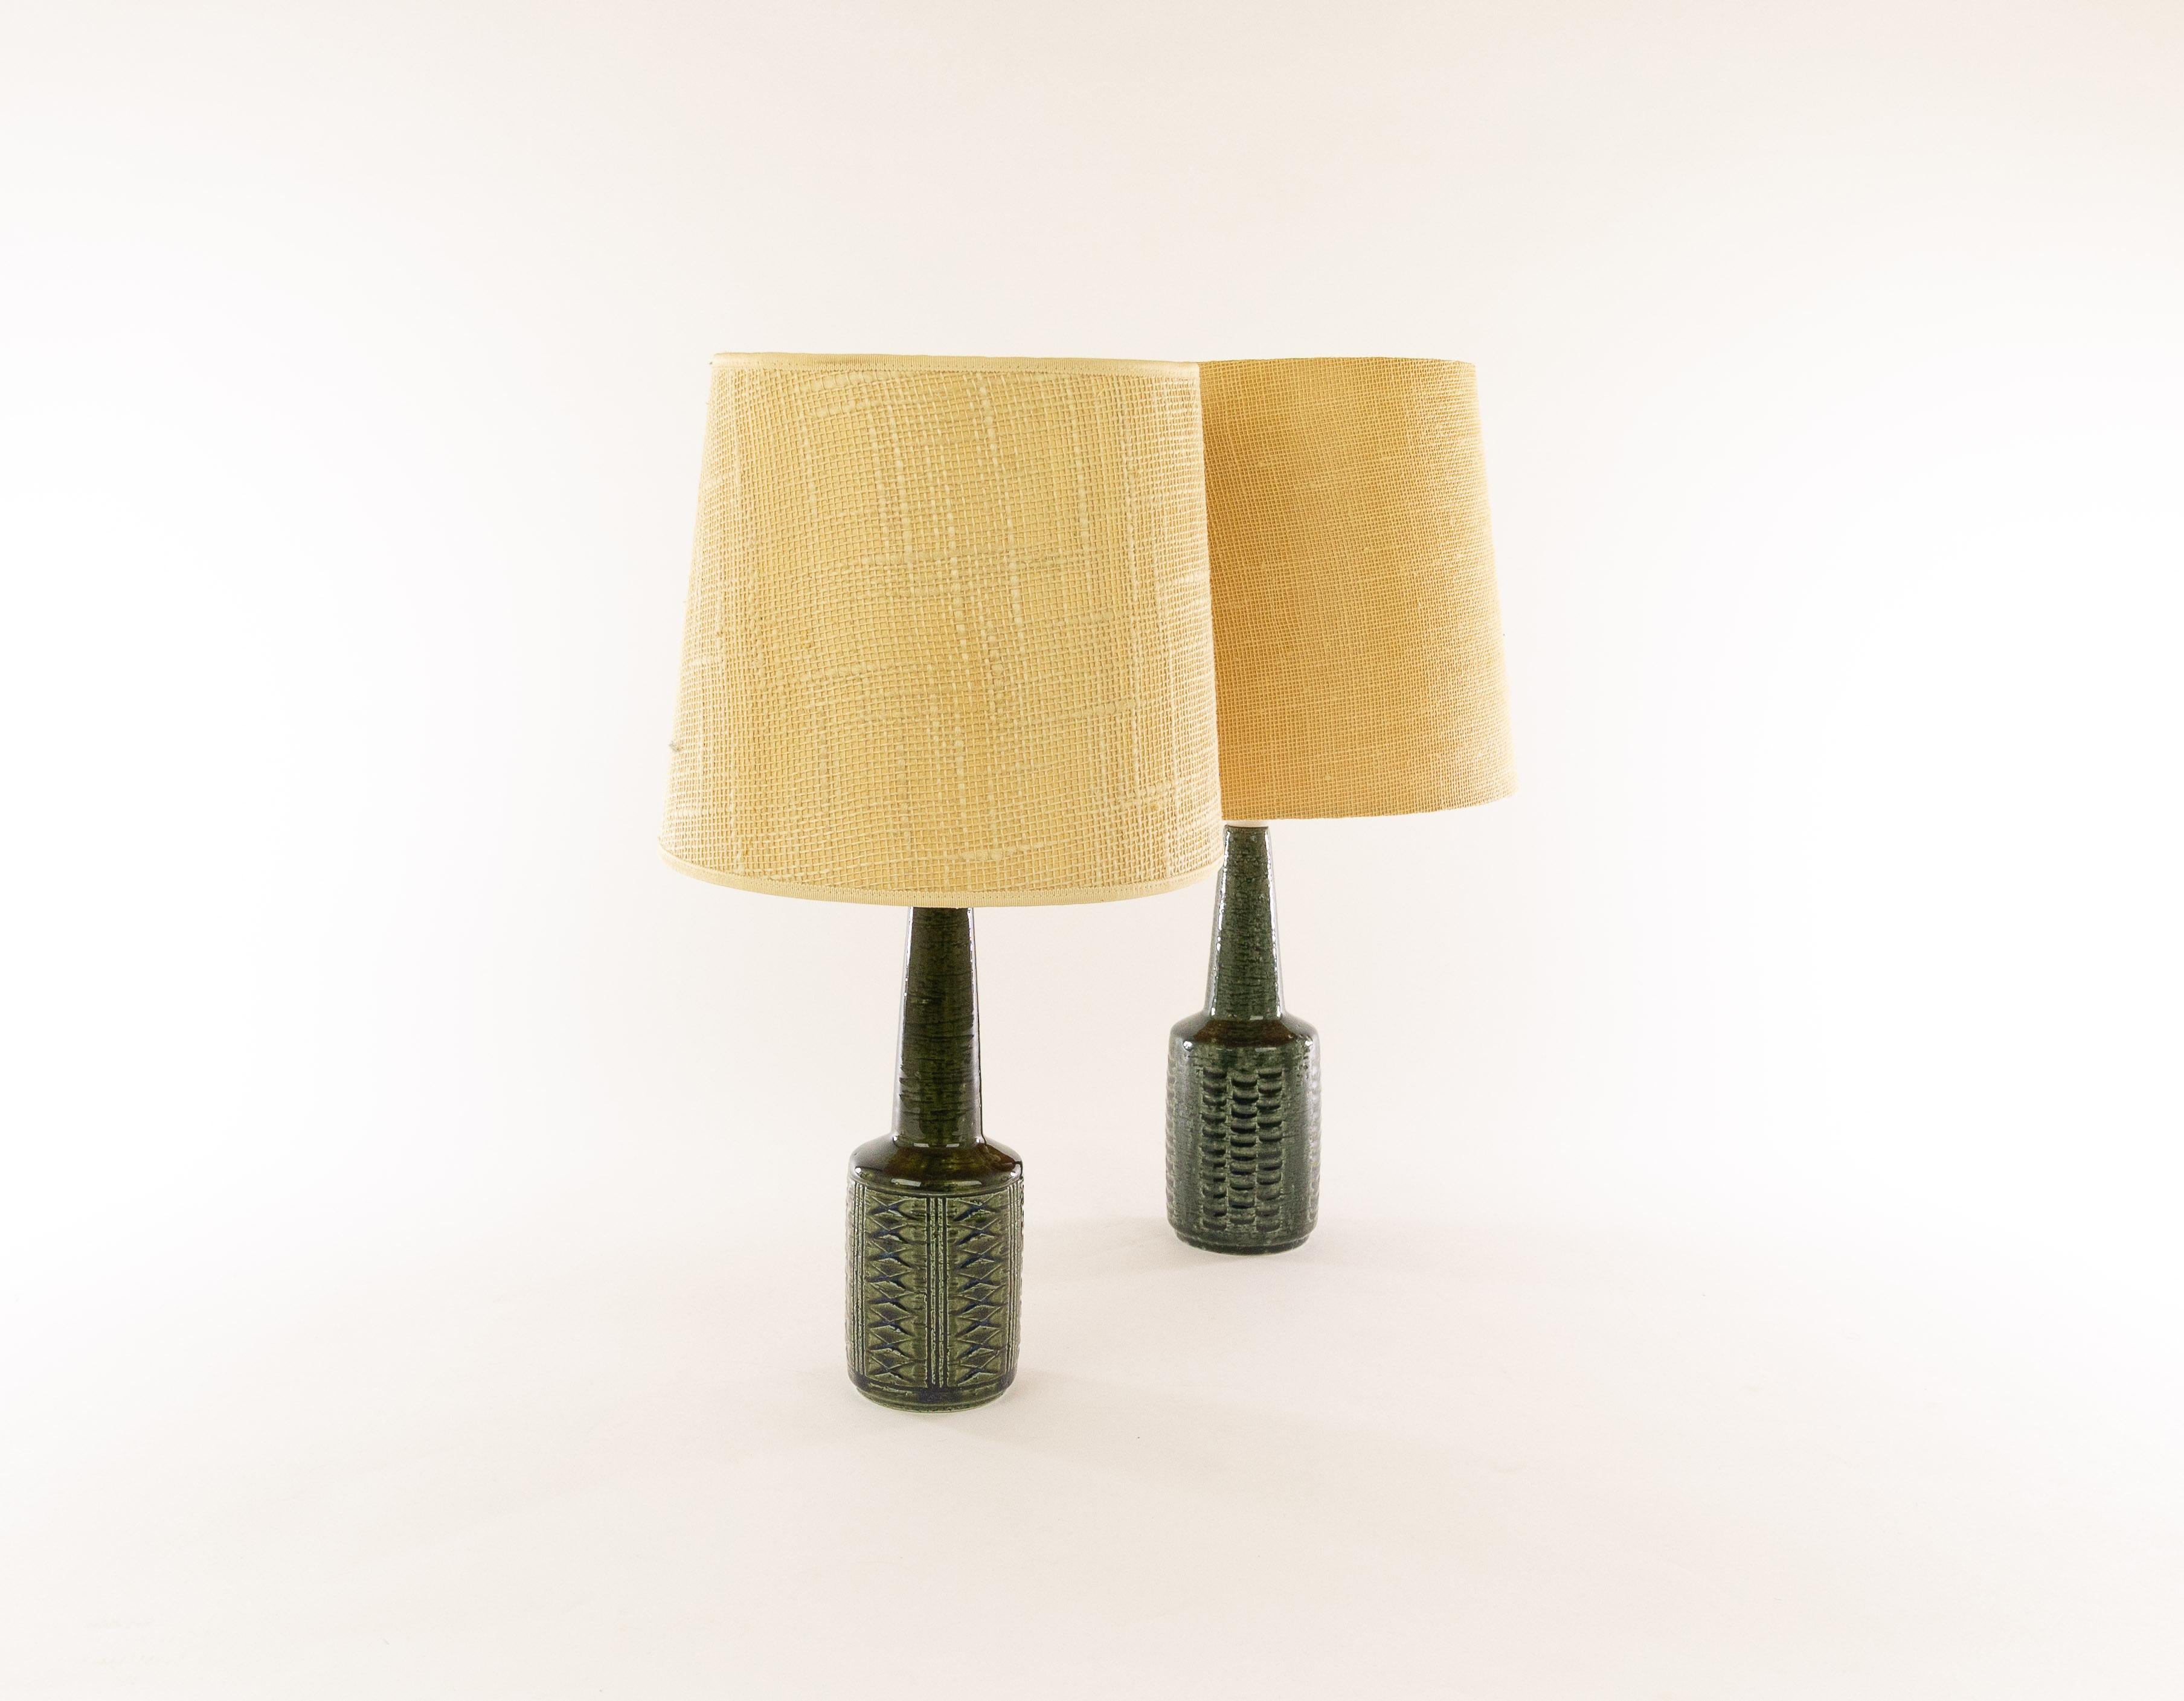 Two charming Danish chamotte (texture clay) table lamps model DL/21 with impressed decoration by Annelise and Per Linnemann-Schmidt for Palshus, Denmark, 1960s.

Palshus produced a wide range of table lamps, in different patterns, height and